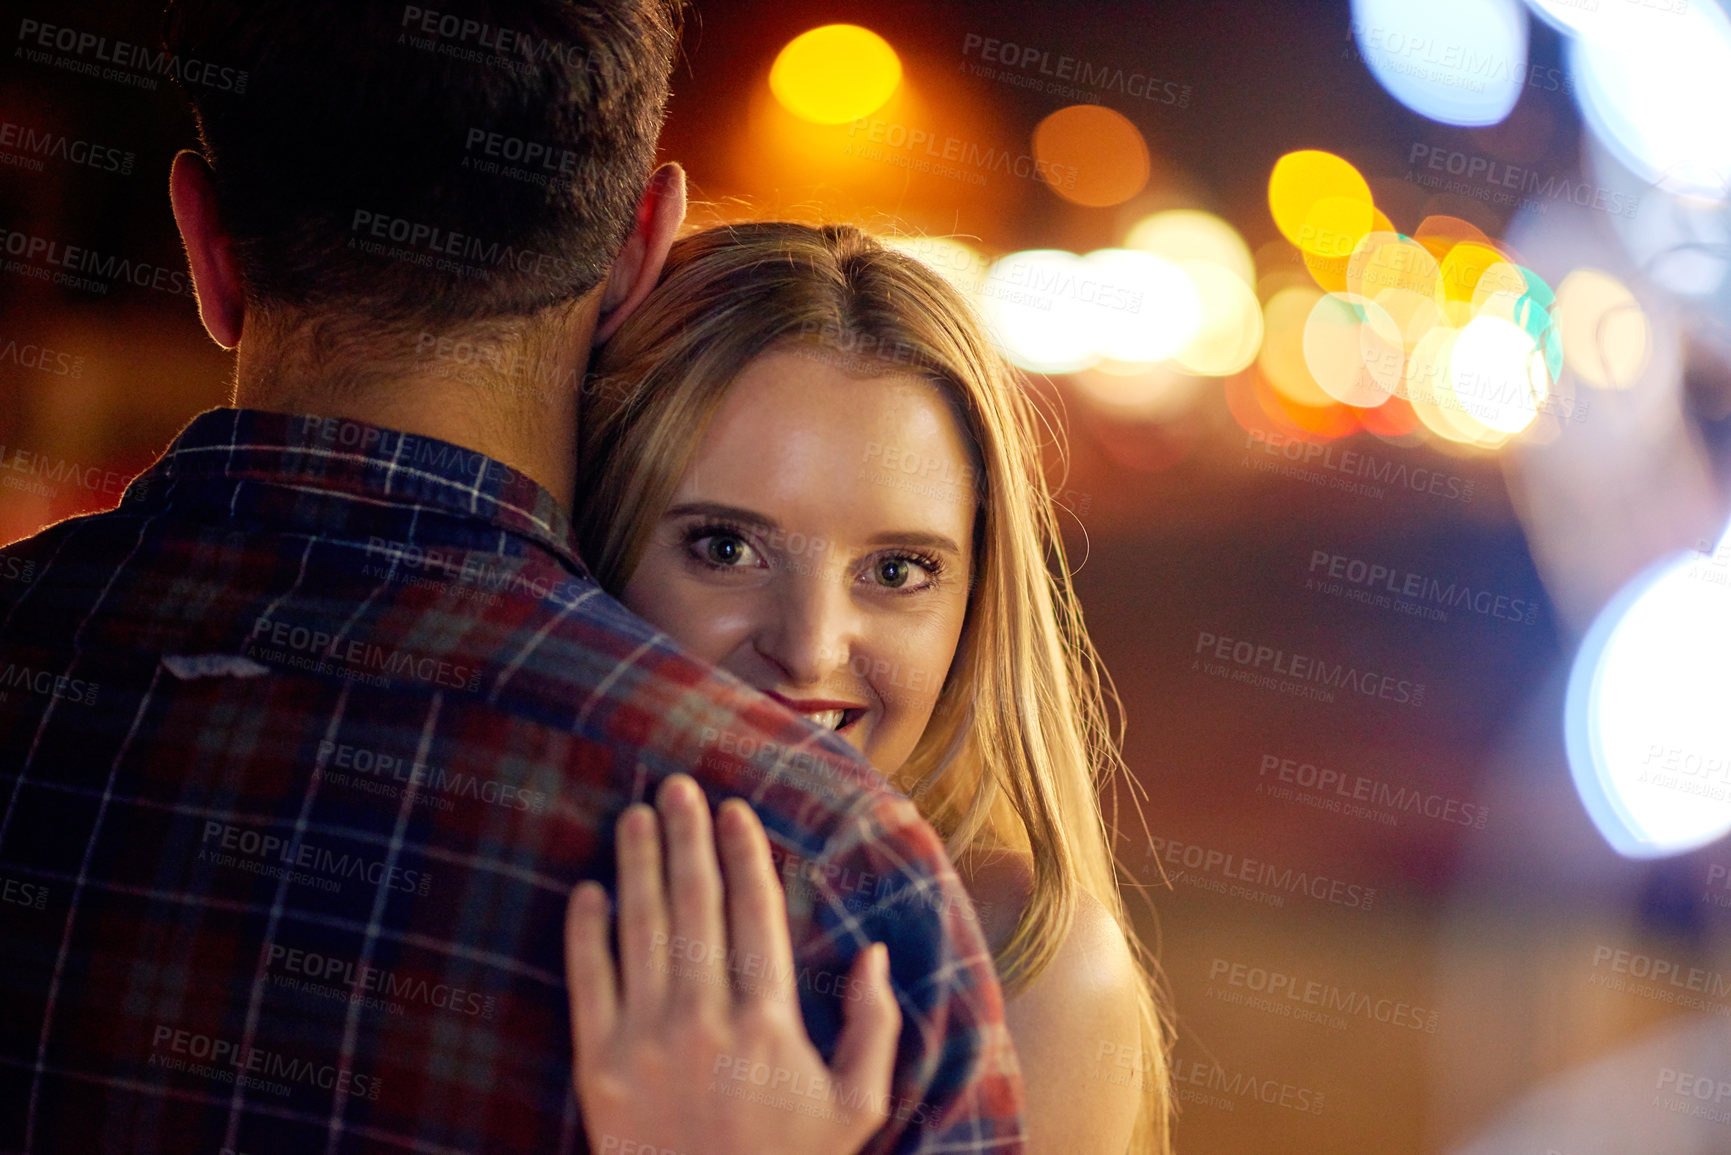 Buy stock photo Shot of a young couple out on a date in the city